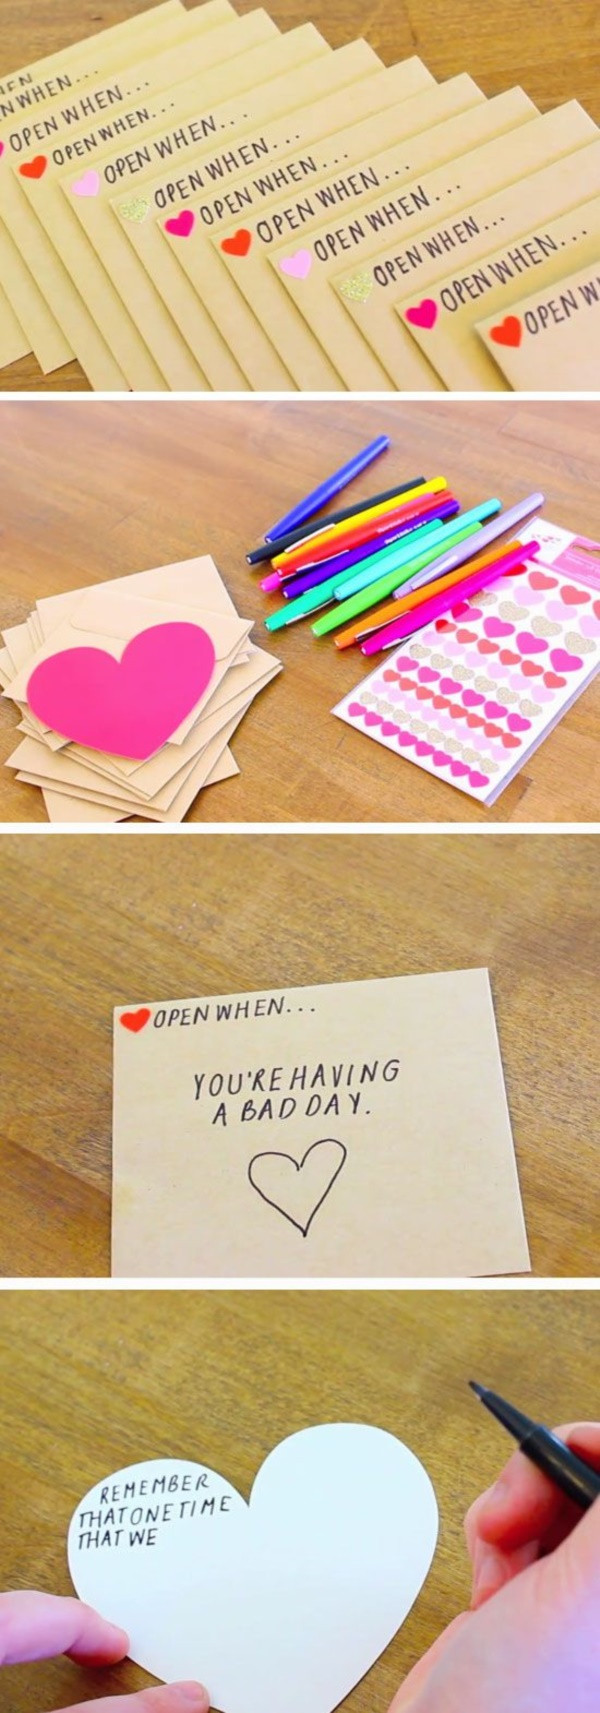 Cute Valentine Gift Ideas For Him
 101 Homemade Valentines Day Ideas for Him that re really CUTE